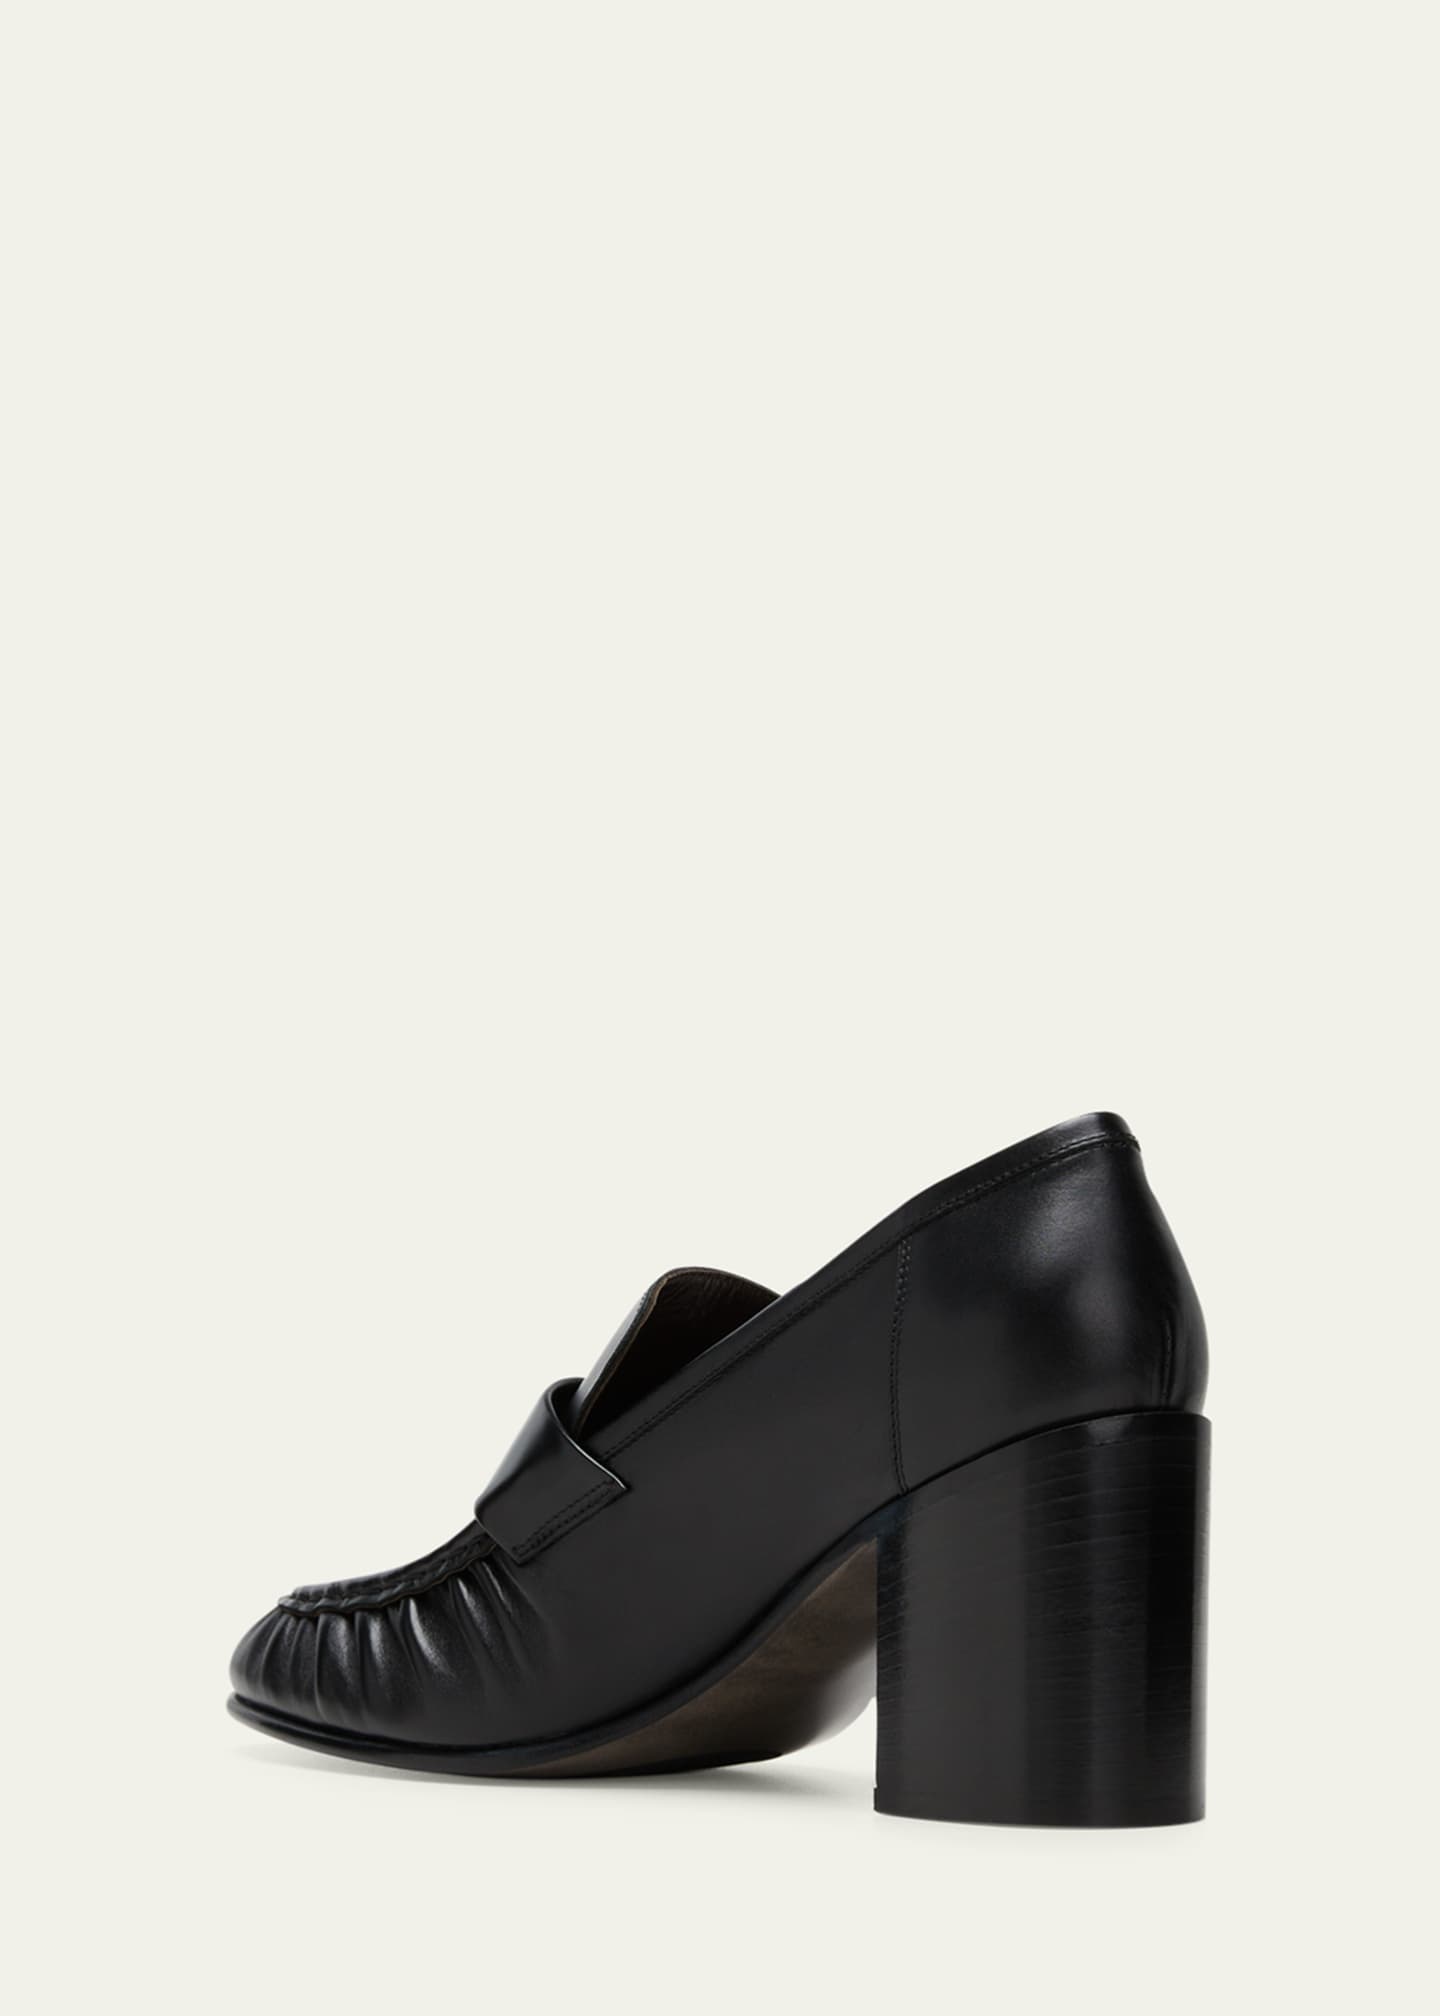 THE ROW Leather Heeled Loafer Pumps - Bergdorf Goodman